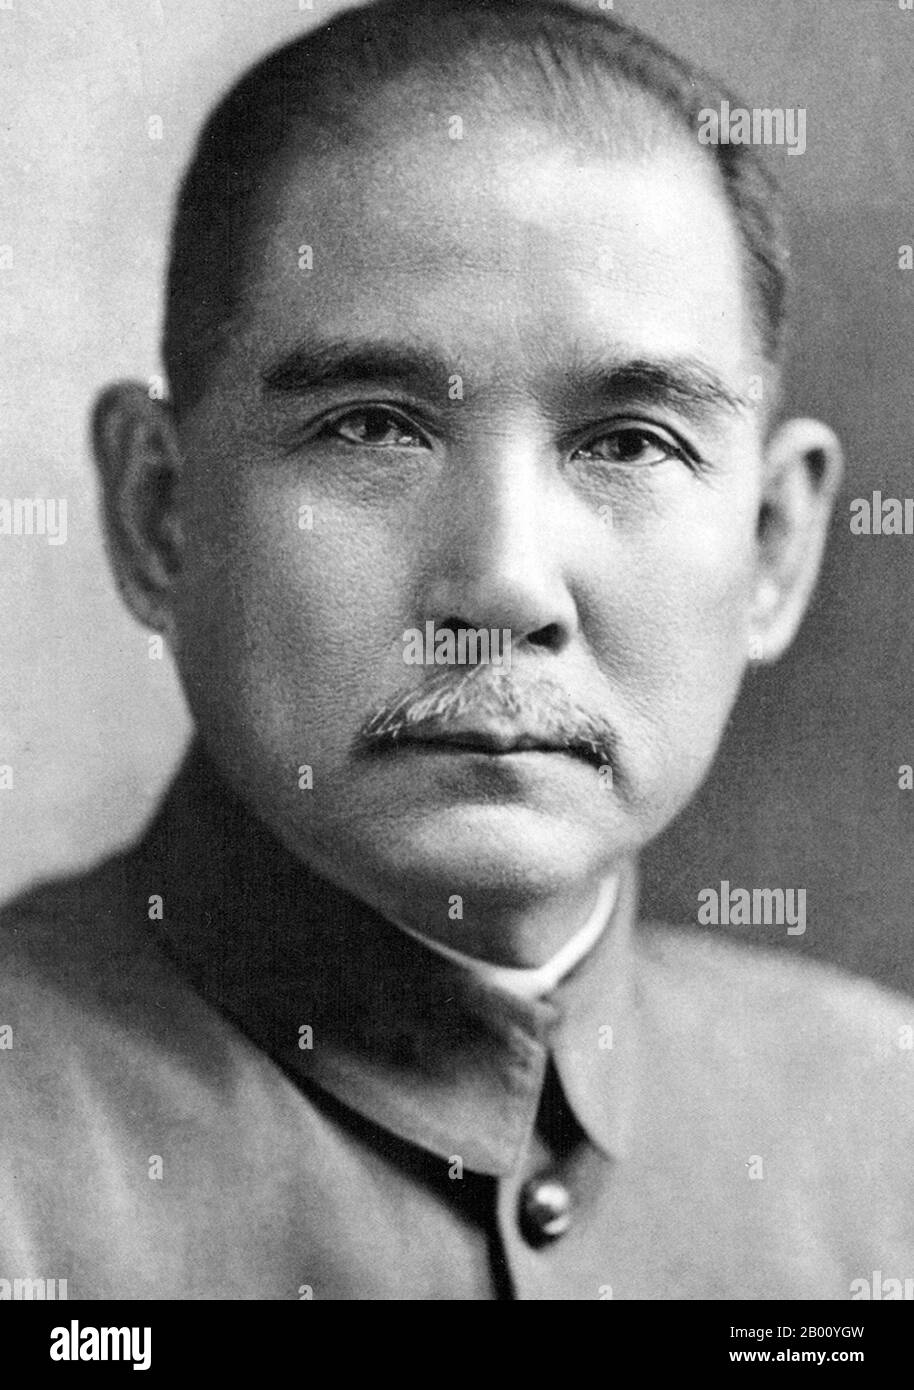 China: Dr Sun Yat-sen (1866-1925), Founder of the Chinese Republic, c. 1911.  Sun Yat-sen (12 November 1866 – 12 March 1925) was a Chinese revolutionary and political leader. As the foremost pioneer of Nationalist China, Sun is frequently referred to as the Founding Father of Republican China.  Sun played an instrumental role in inspiring the overthrow of the Qing Dynasty, the last imperial dynasty of China. Sun was the first provisional president when the Republic of China (ROC) was founded in 1912 and later co-founded the Chinese National People's Party or Kuomintang (KMT). Stock Photo